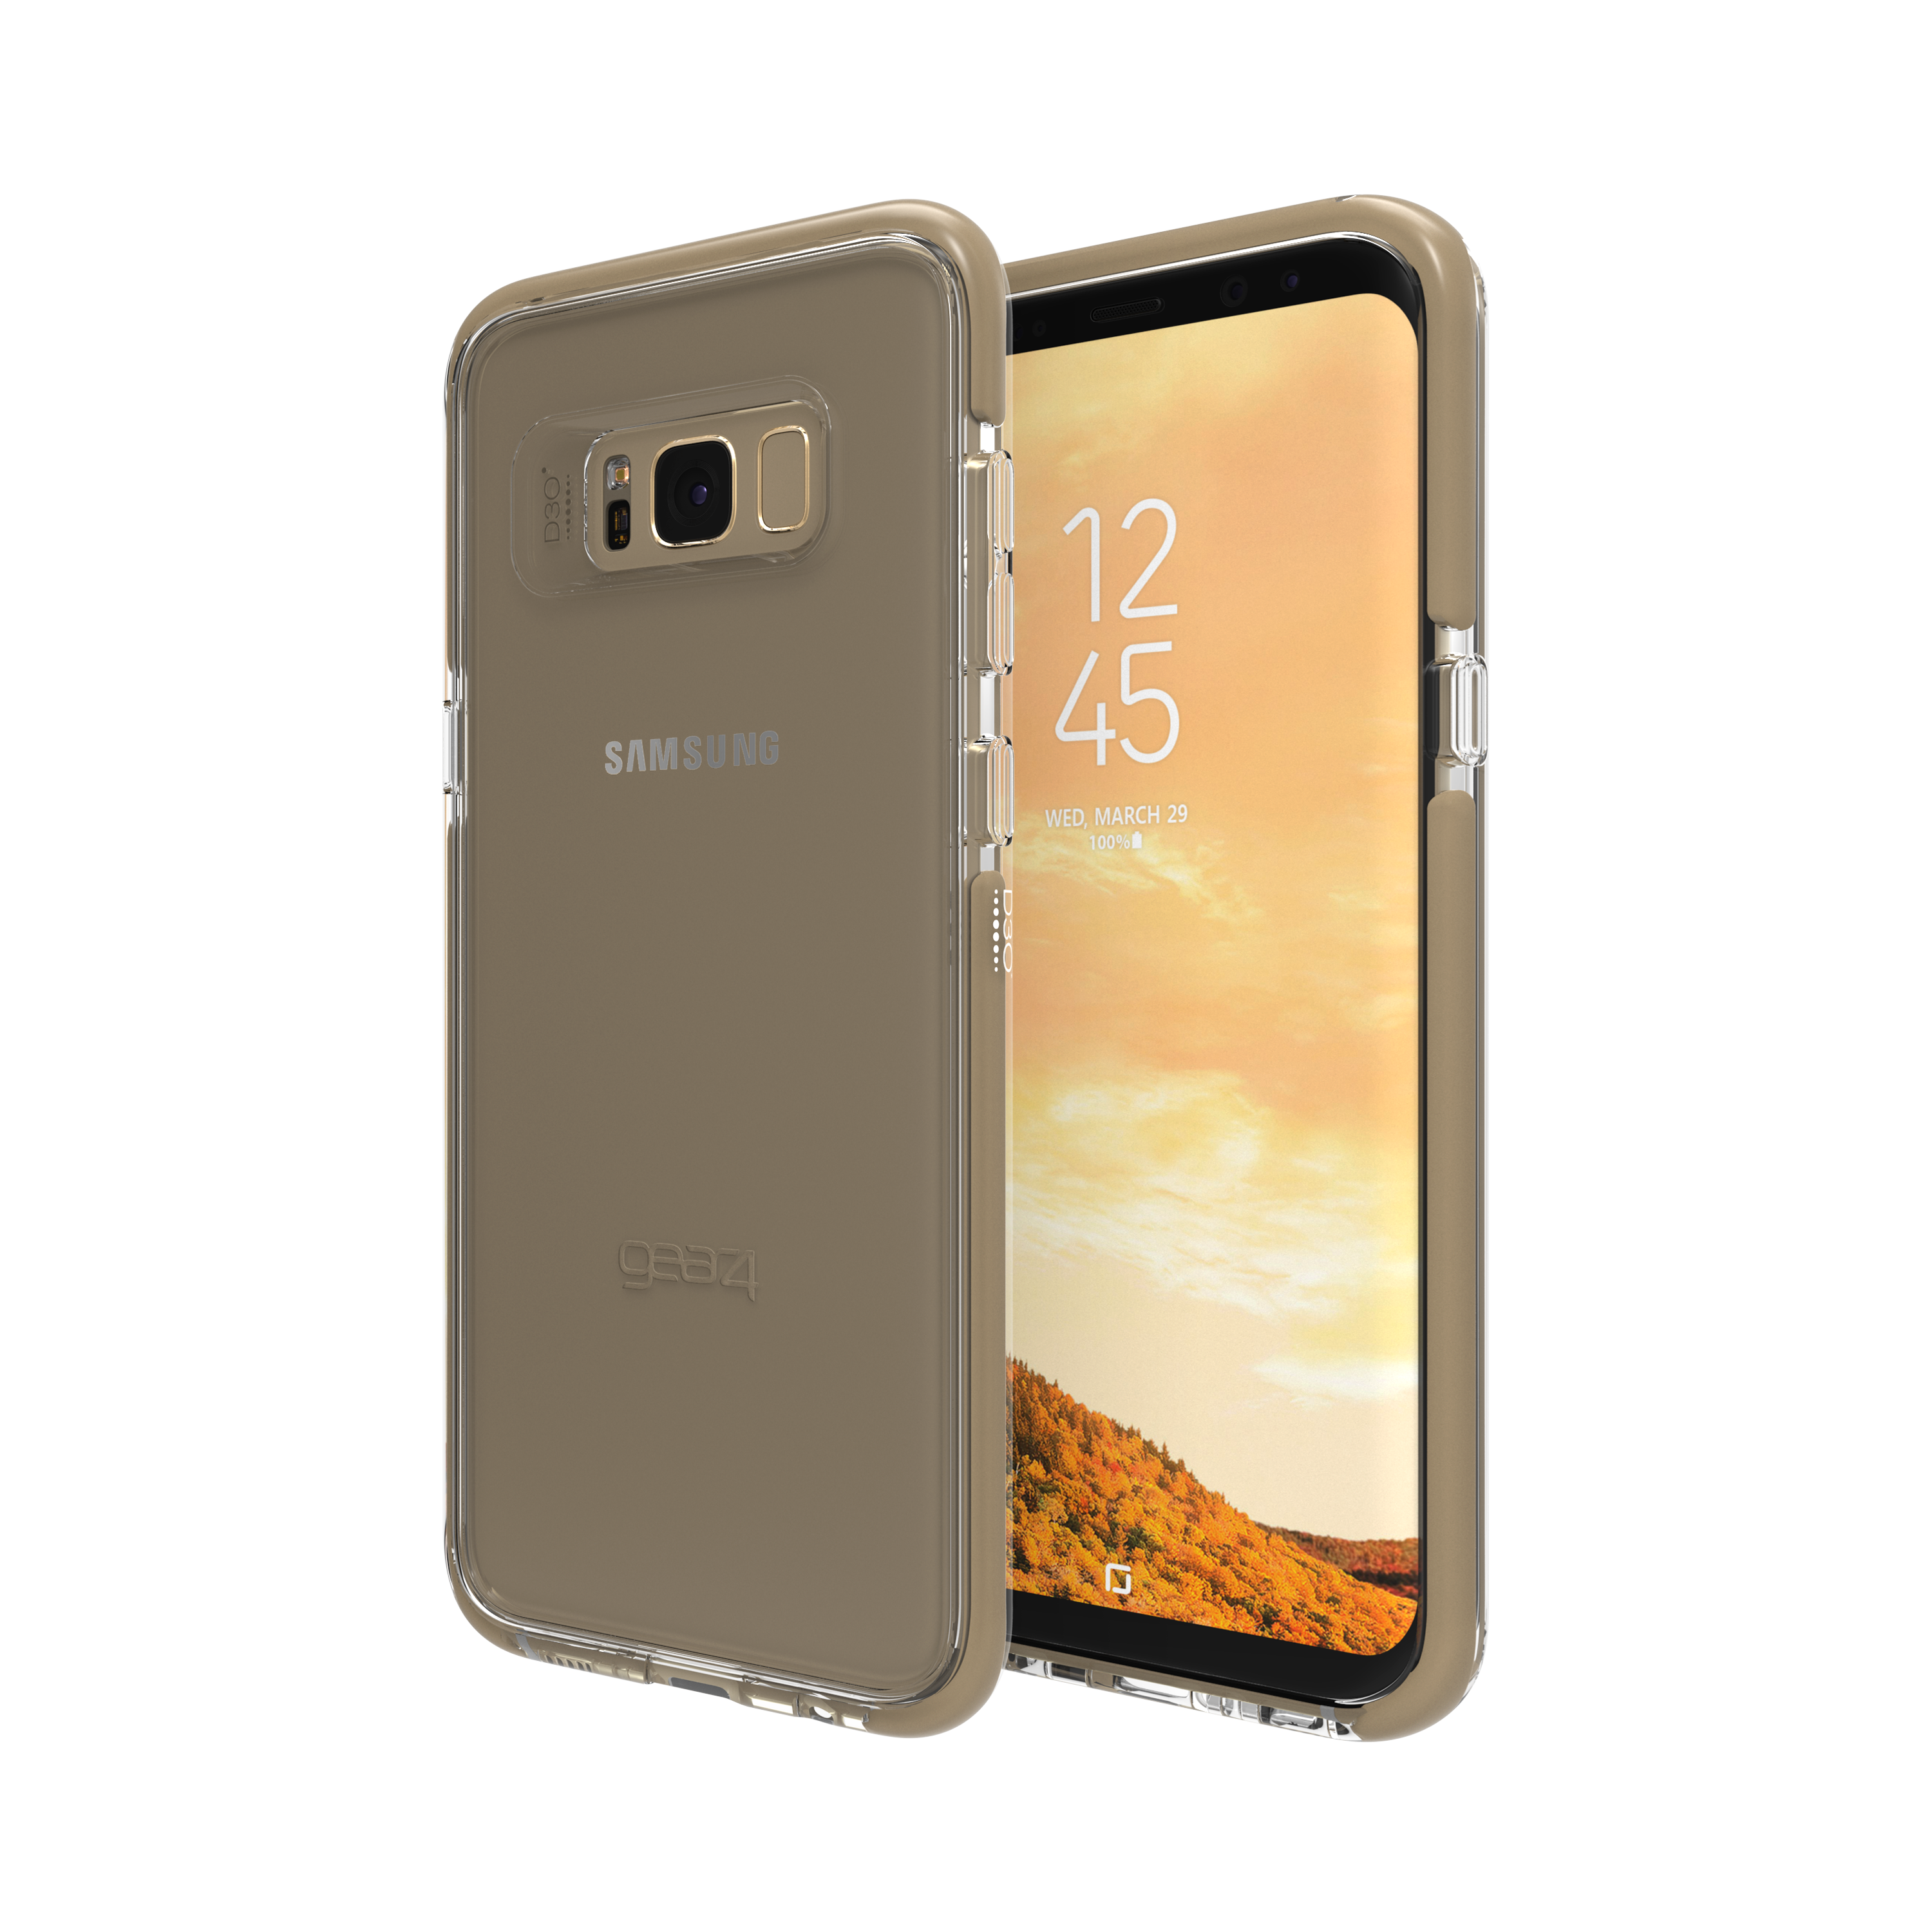 S8+, GALAXY GEAR4 GOLD Backcover, Piccadilly, SAMSUNG,